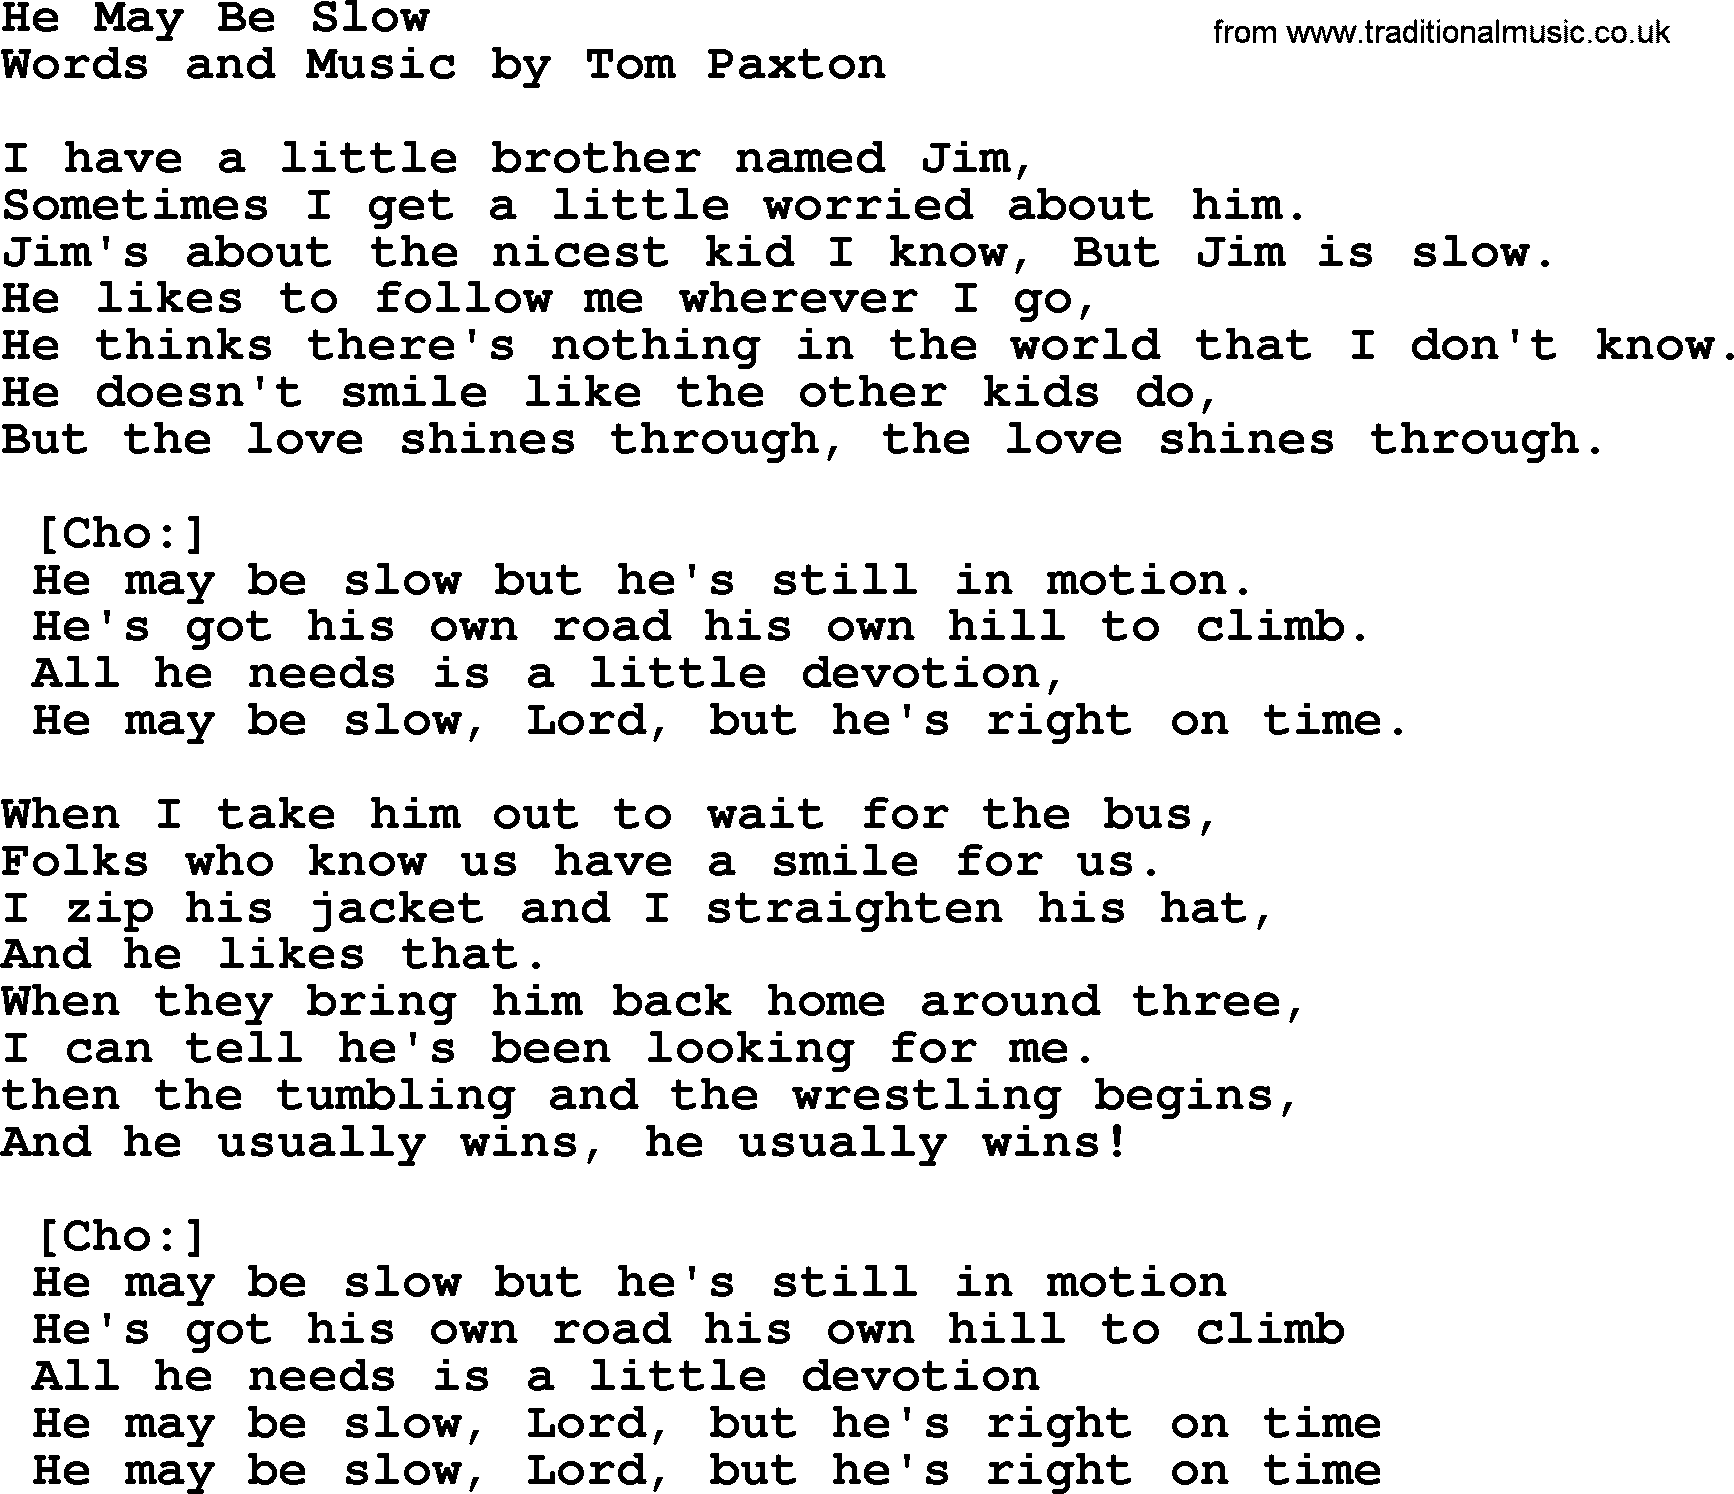 Tom Paxton song: He May Be Slow, lyrics